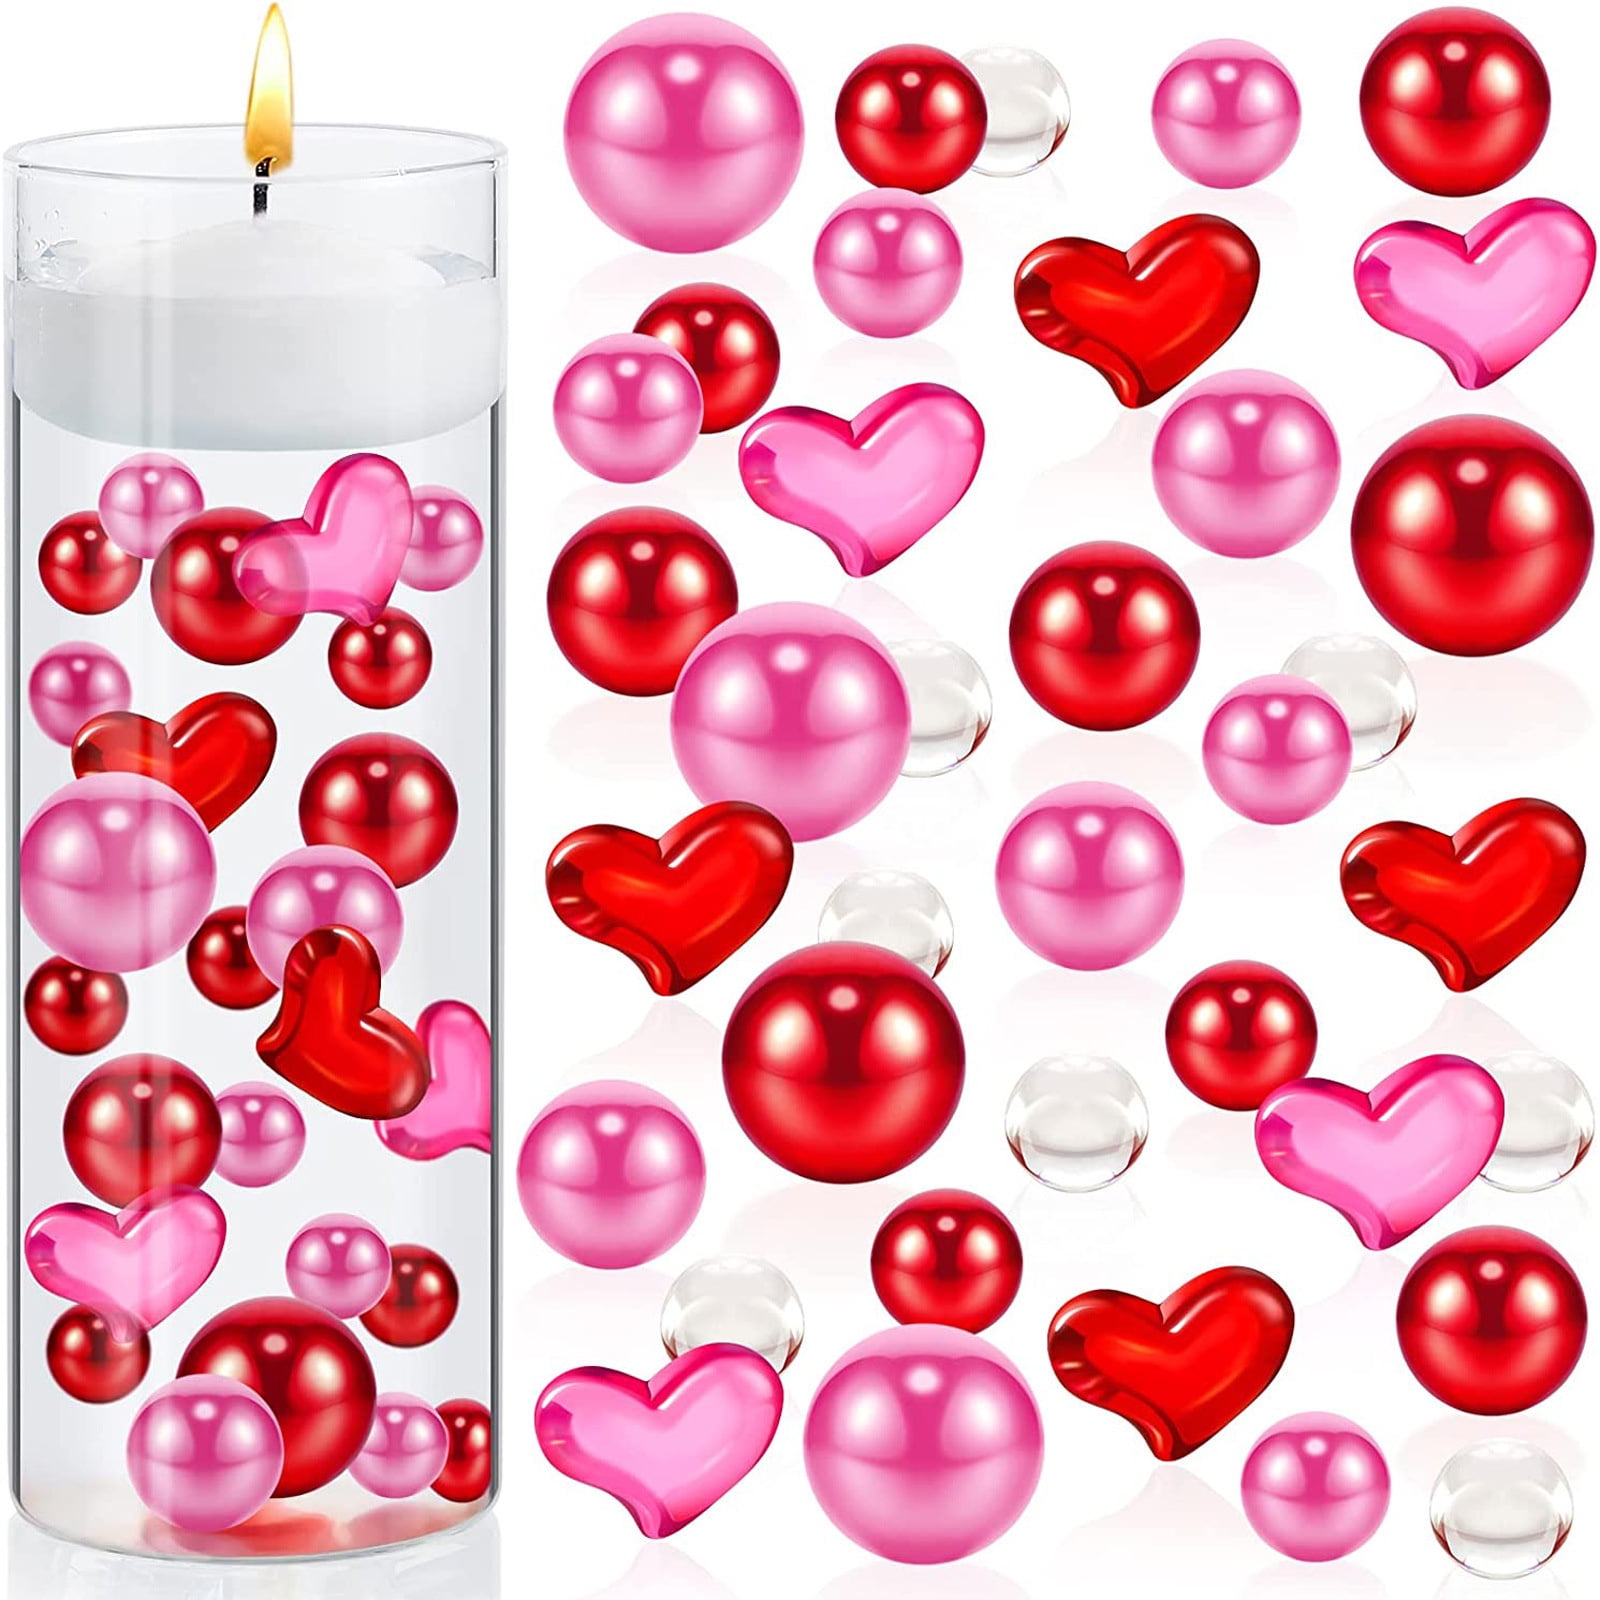 Larber 10164Pcs Valentine's Day Vase Filler Decoration Red White Heart  Pearls Bowl Filler Mini Acrylic Love Hearts Beads Floating Candle  Centerpiece